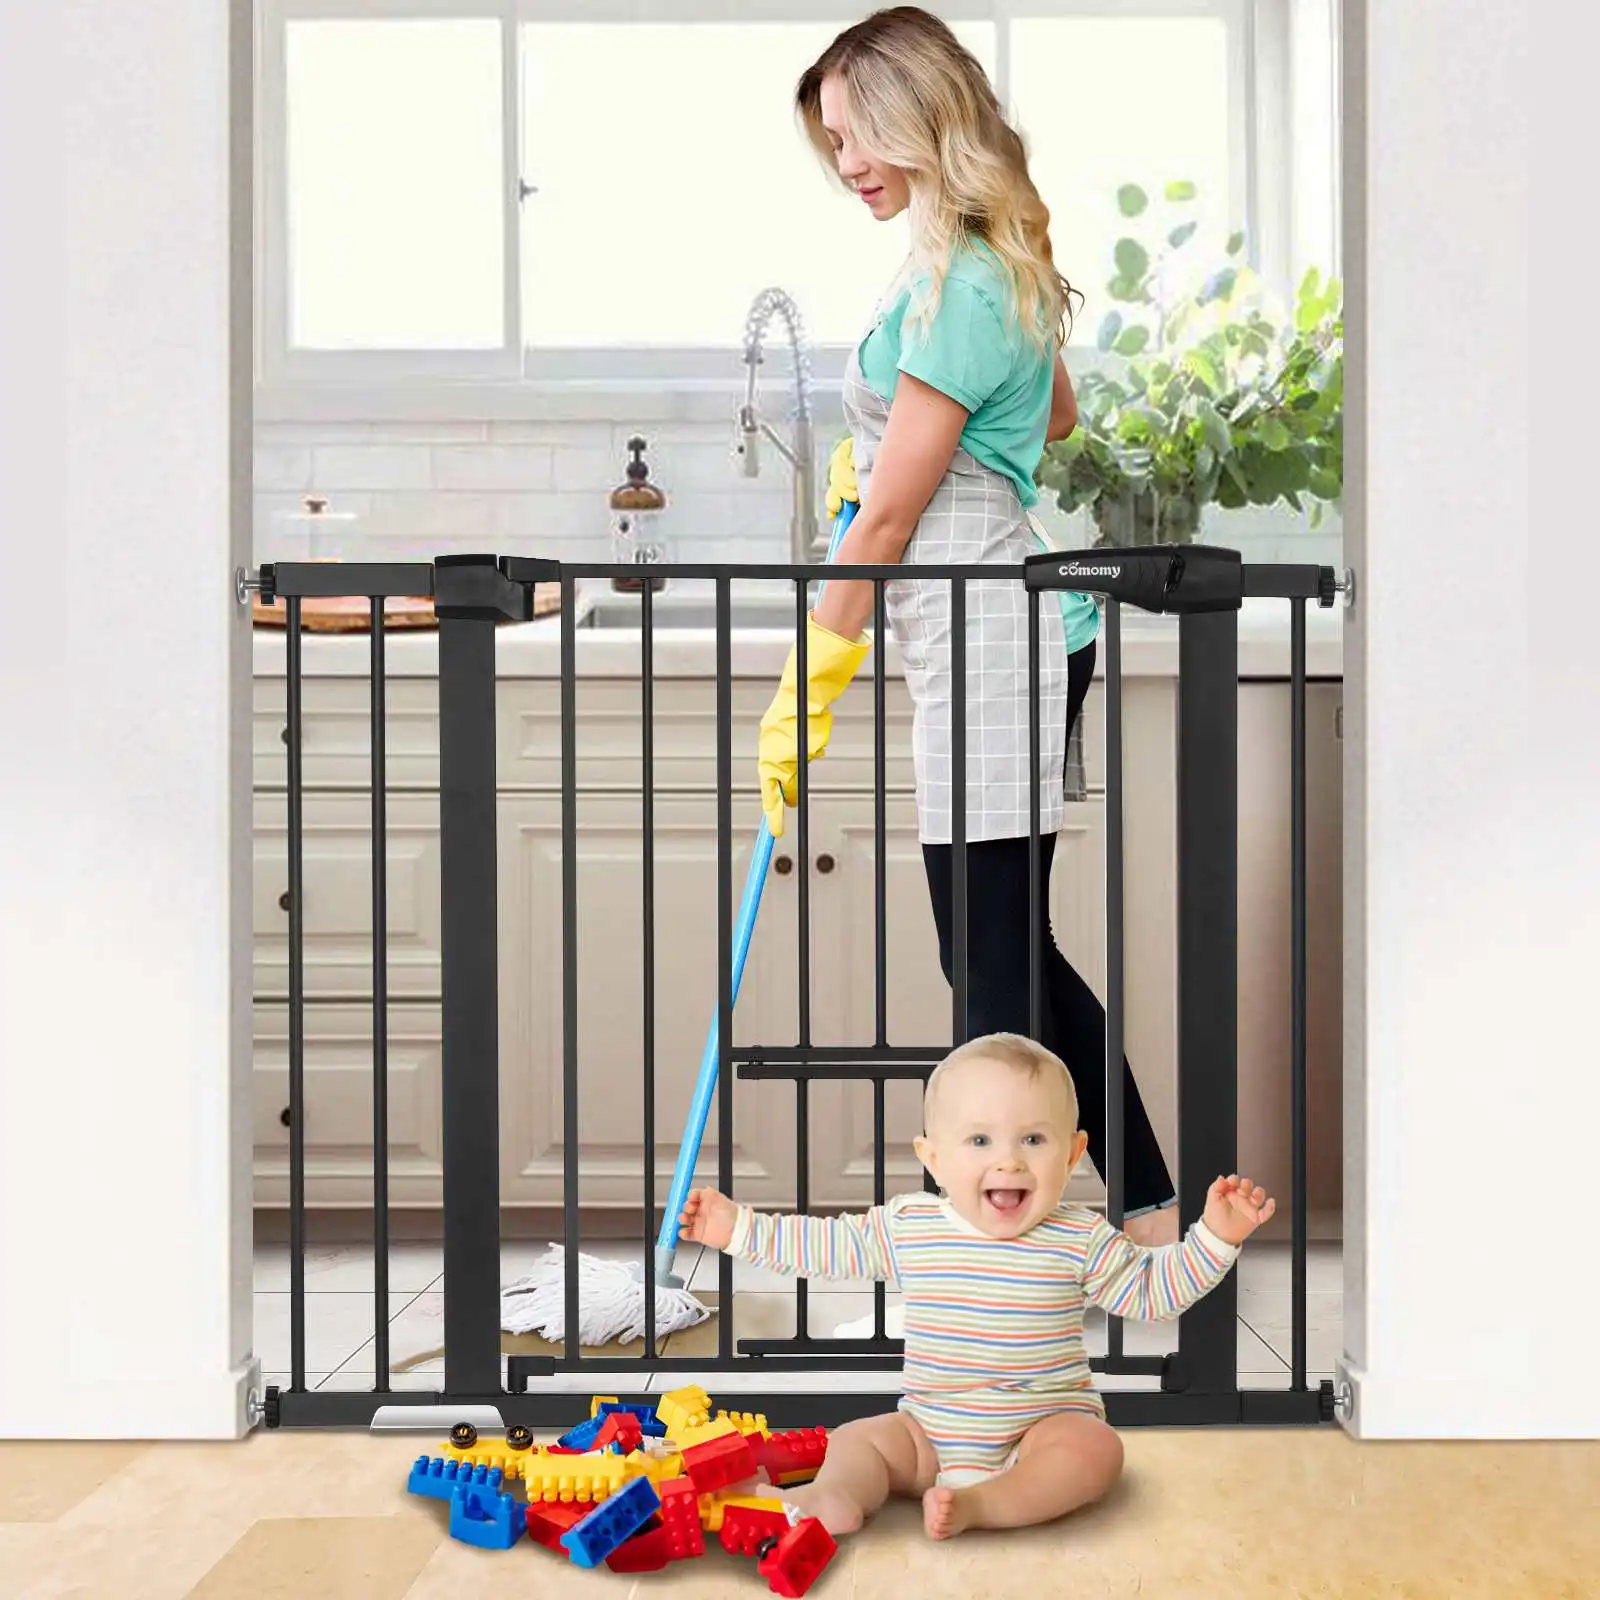 Baby Safety Gate Extra Wide Tall Children Protection Security Stairs Door fence kids Safe Doorway Gate Pets dog Isolating Fence